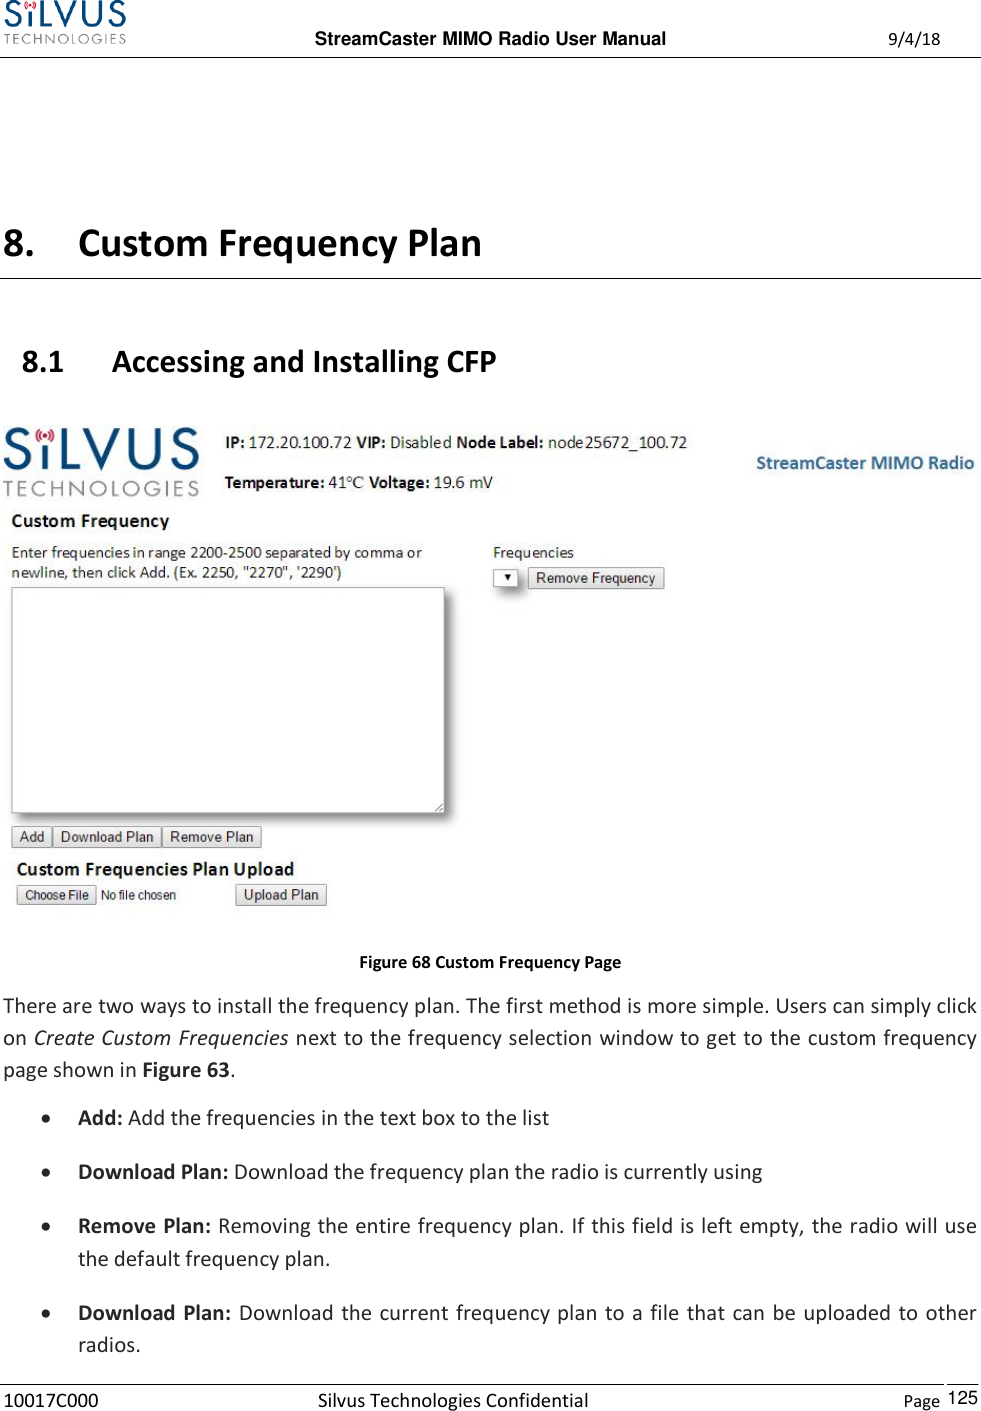  StreamCaster MIMO Radio User Manual  9/4/18 10017C000 Silvus Technologies Confidential    Page    125  8. Custom Frequency Plan 8.1 Accessing and Installing CFP  Figure 68 Custom Frequency Page There are two ways to install the frequency plan. The first method is more simple. Users can simply click on Create Custom Frequencies next to the frequency selection window to get to the custom frequency page shown in Figure 63.   Add: Add the frequencies in the text box to the list  Download Plan: Download the frequency plan the radio is currently using  Remove Plan: Removing the entire frequency plan. If this field is left empty, the radio will use the default frequency plan.  Download Plan:  Download the current frequency plan to a file that can be uploaded to other radios. 